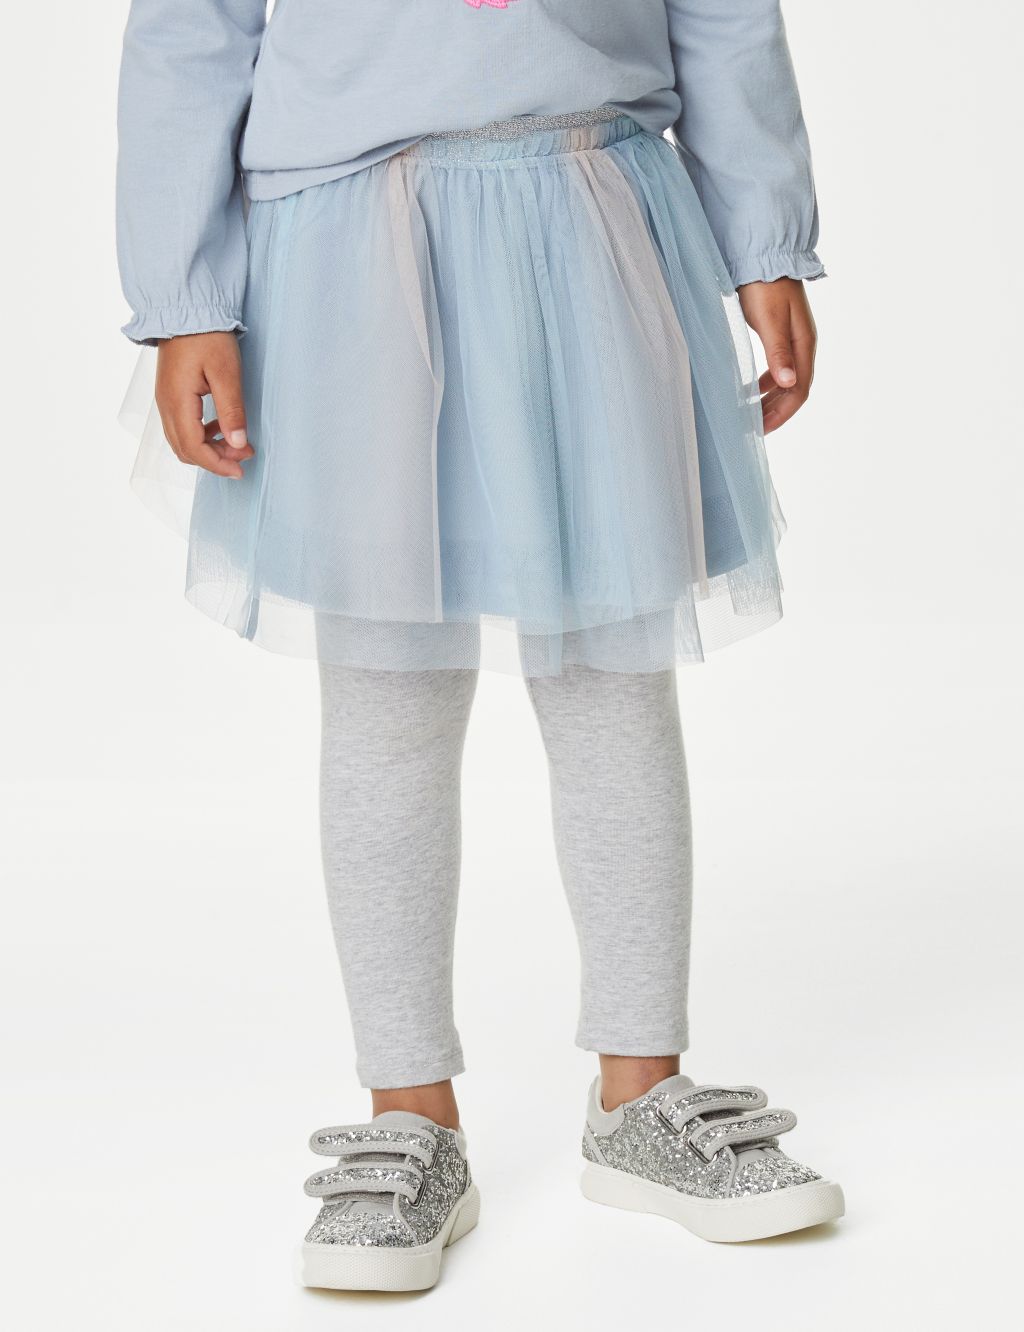 2pc Disney Frozen™ Top & Bottom Outfit (2-8 Yrs) image 5